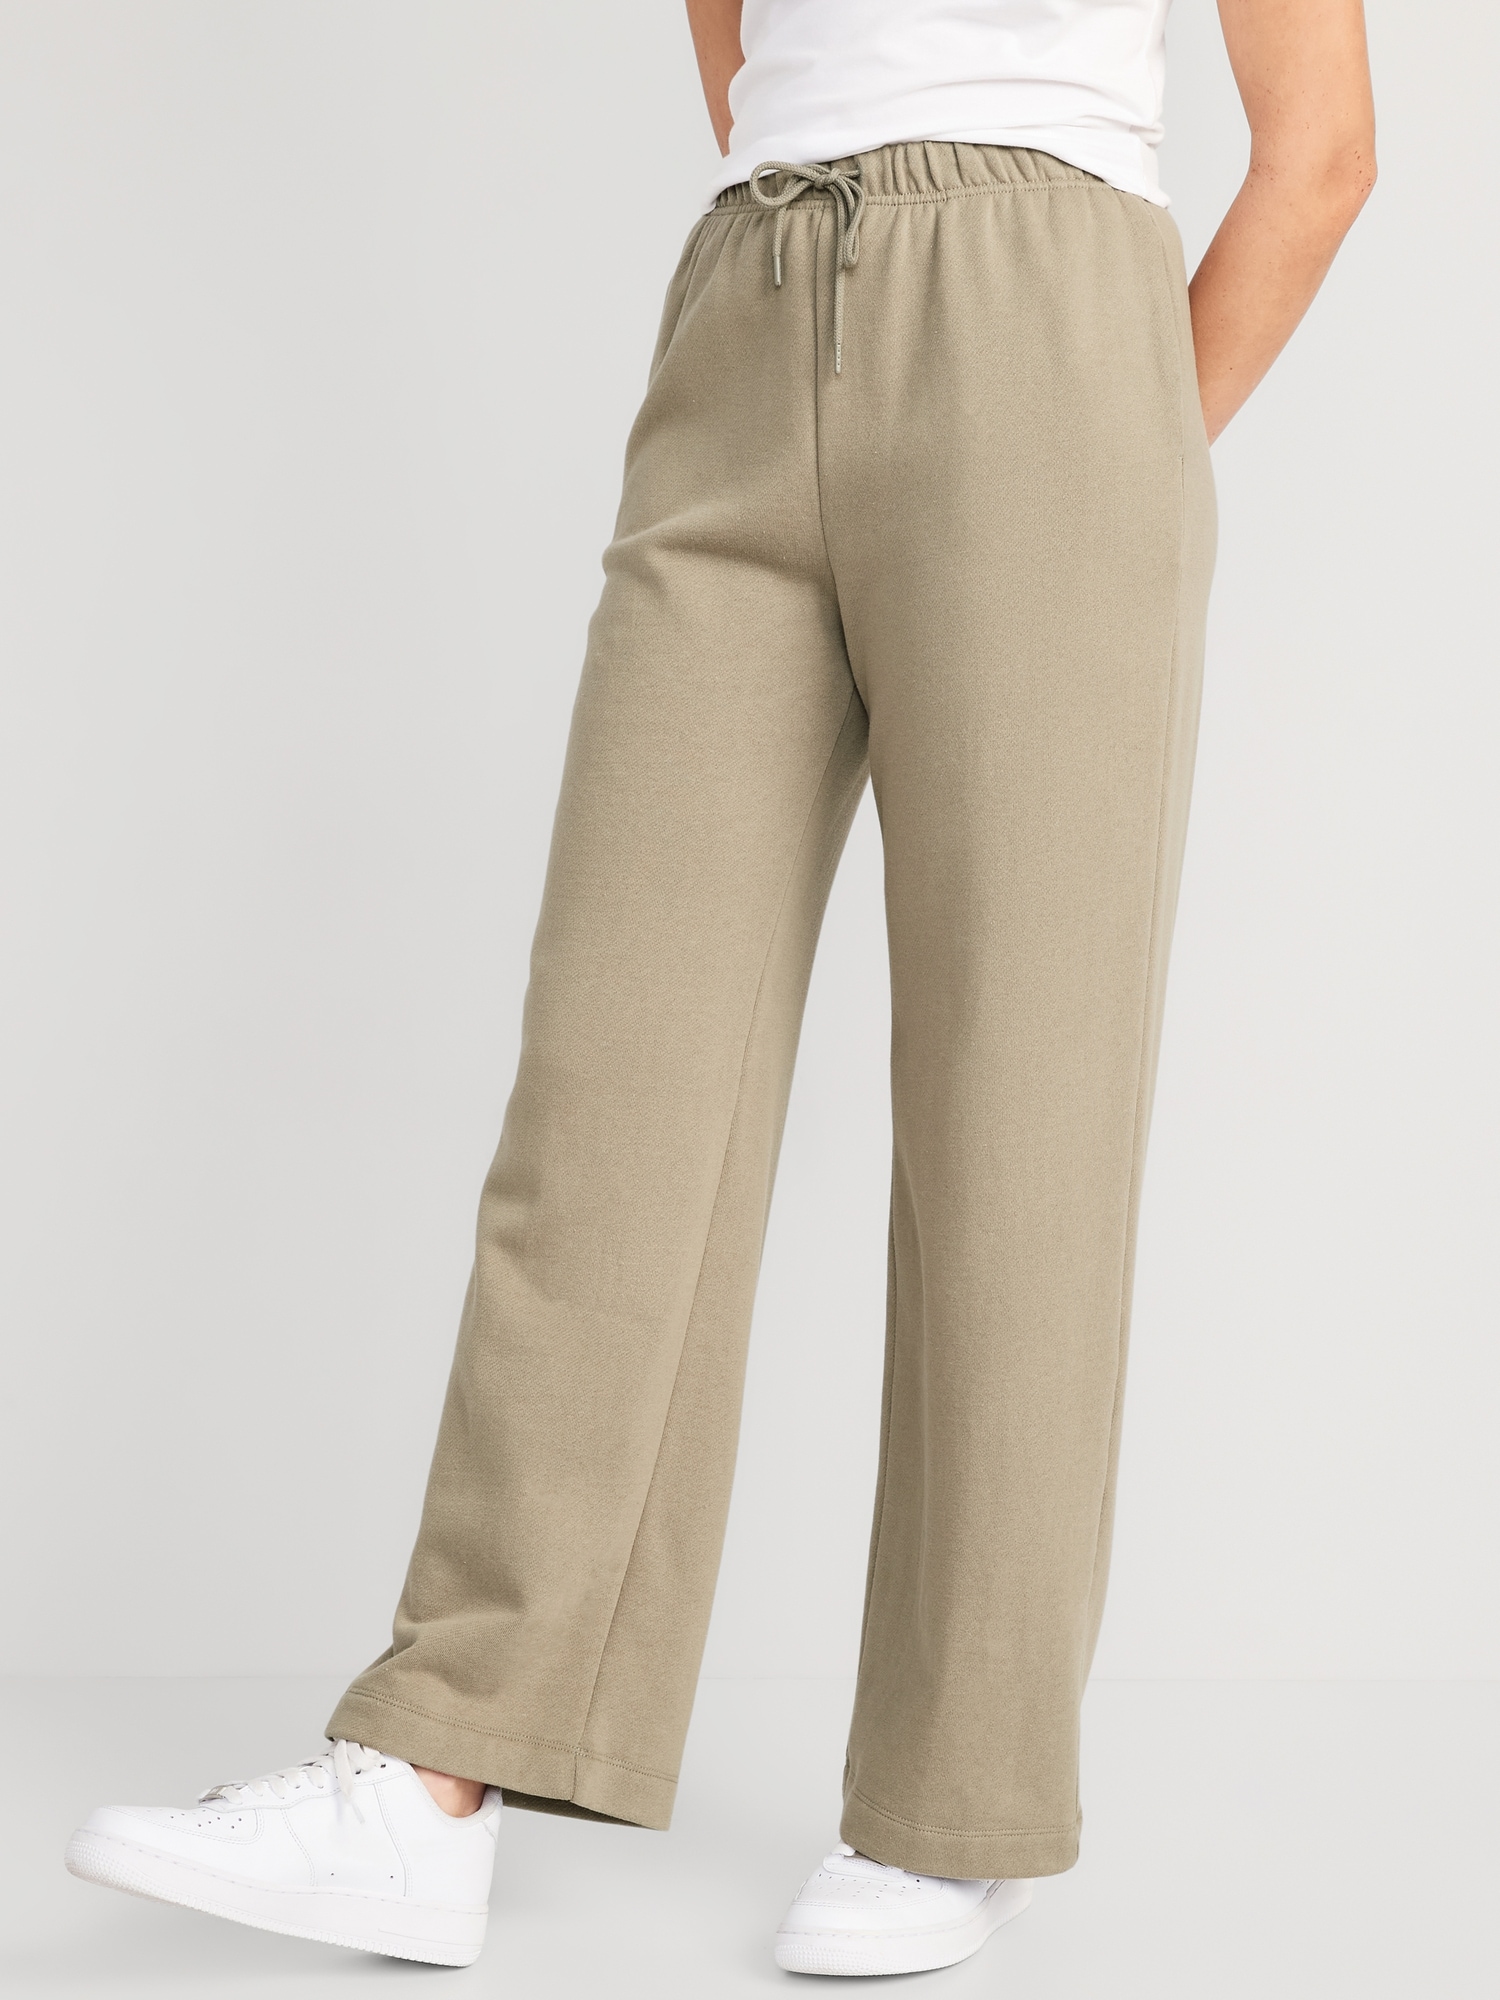 Old Navy Extra High-Waisted Vintage Straight Lounge Sweatpants for Women beige. 1